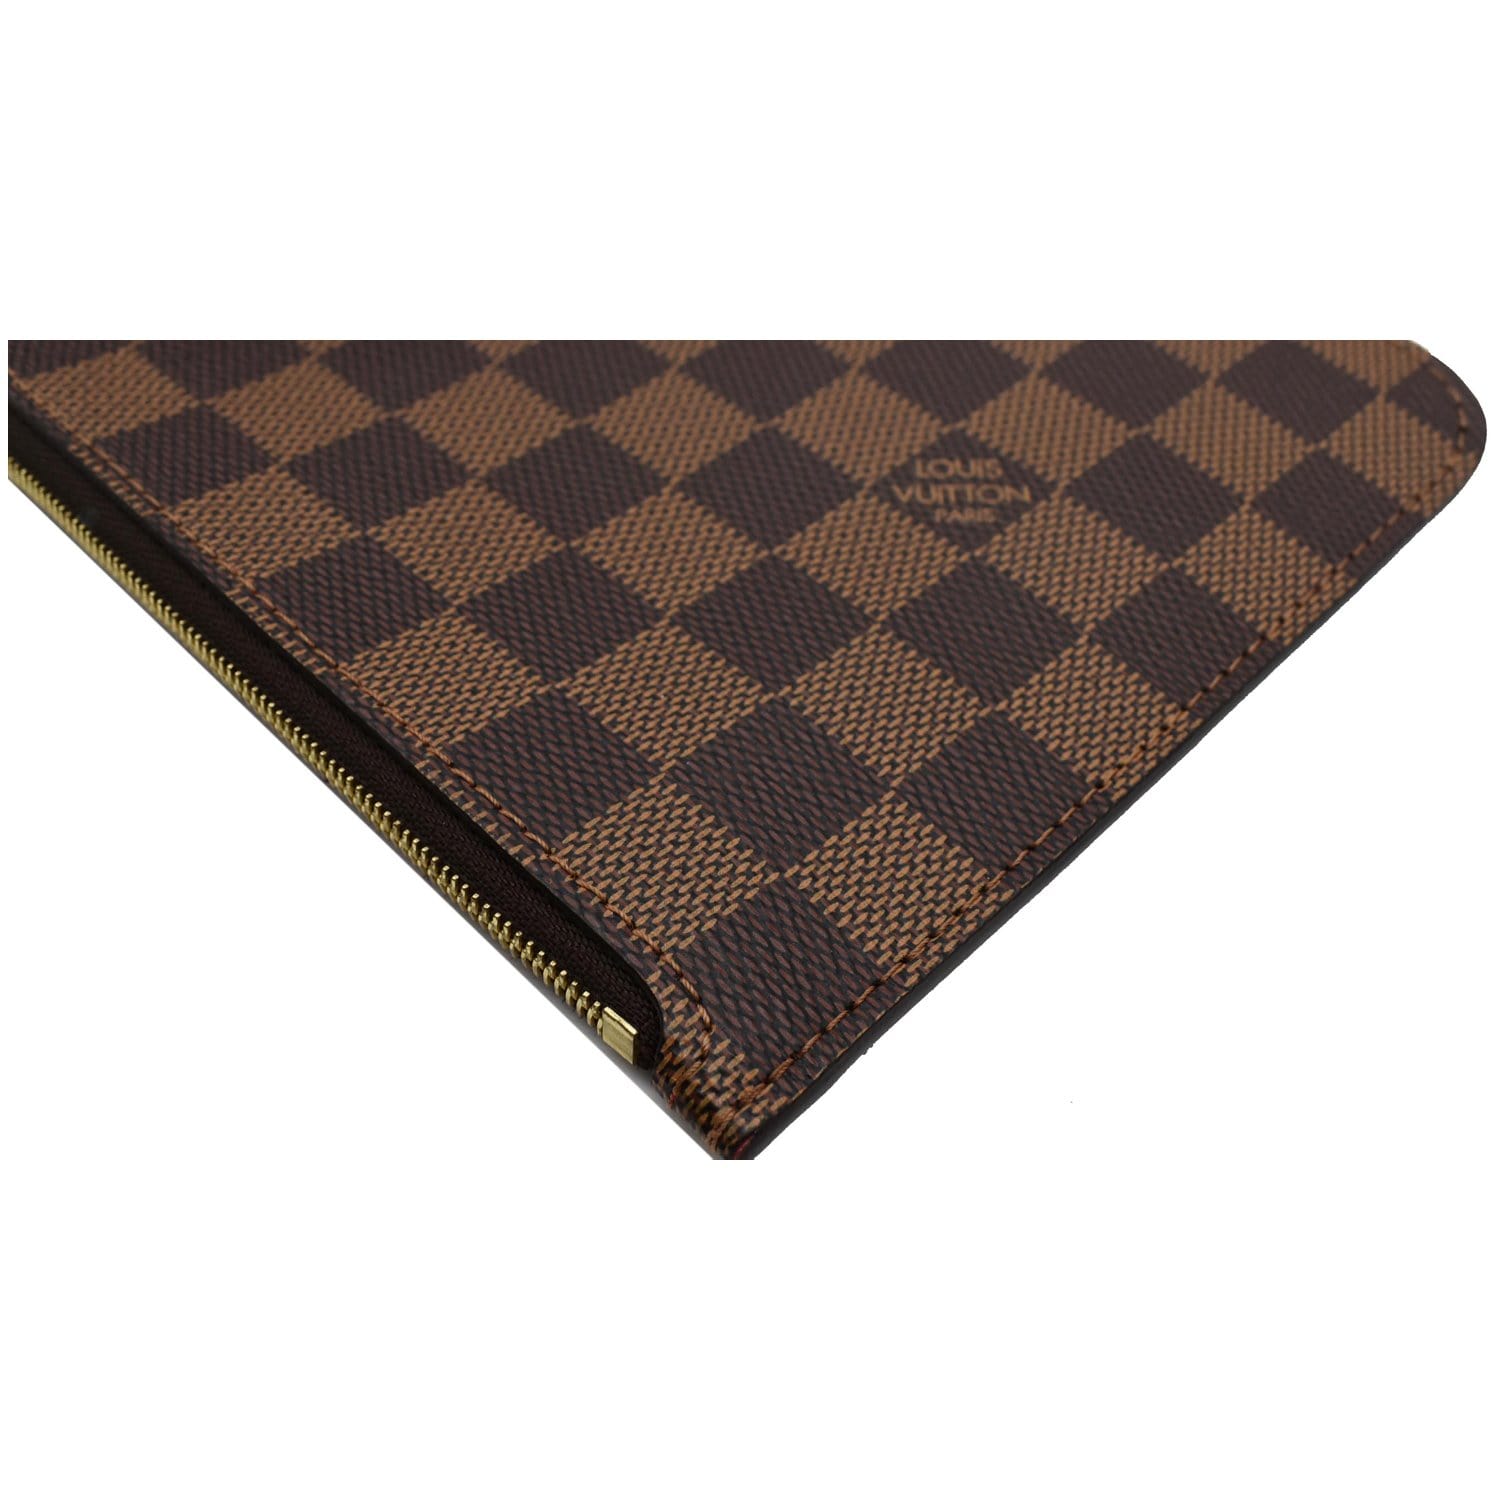 Louis Vuitton, Bags, Louis Vuitton Neverfull Mm Damier Ebne N4358 New  With Wristlet Discontinued